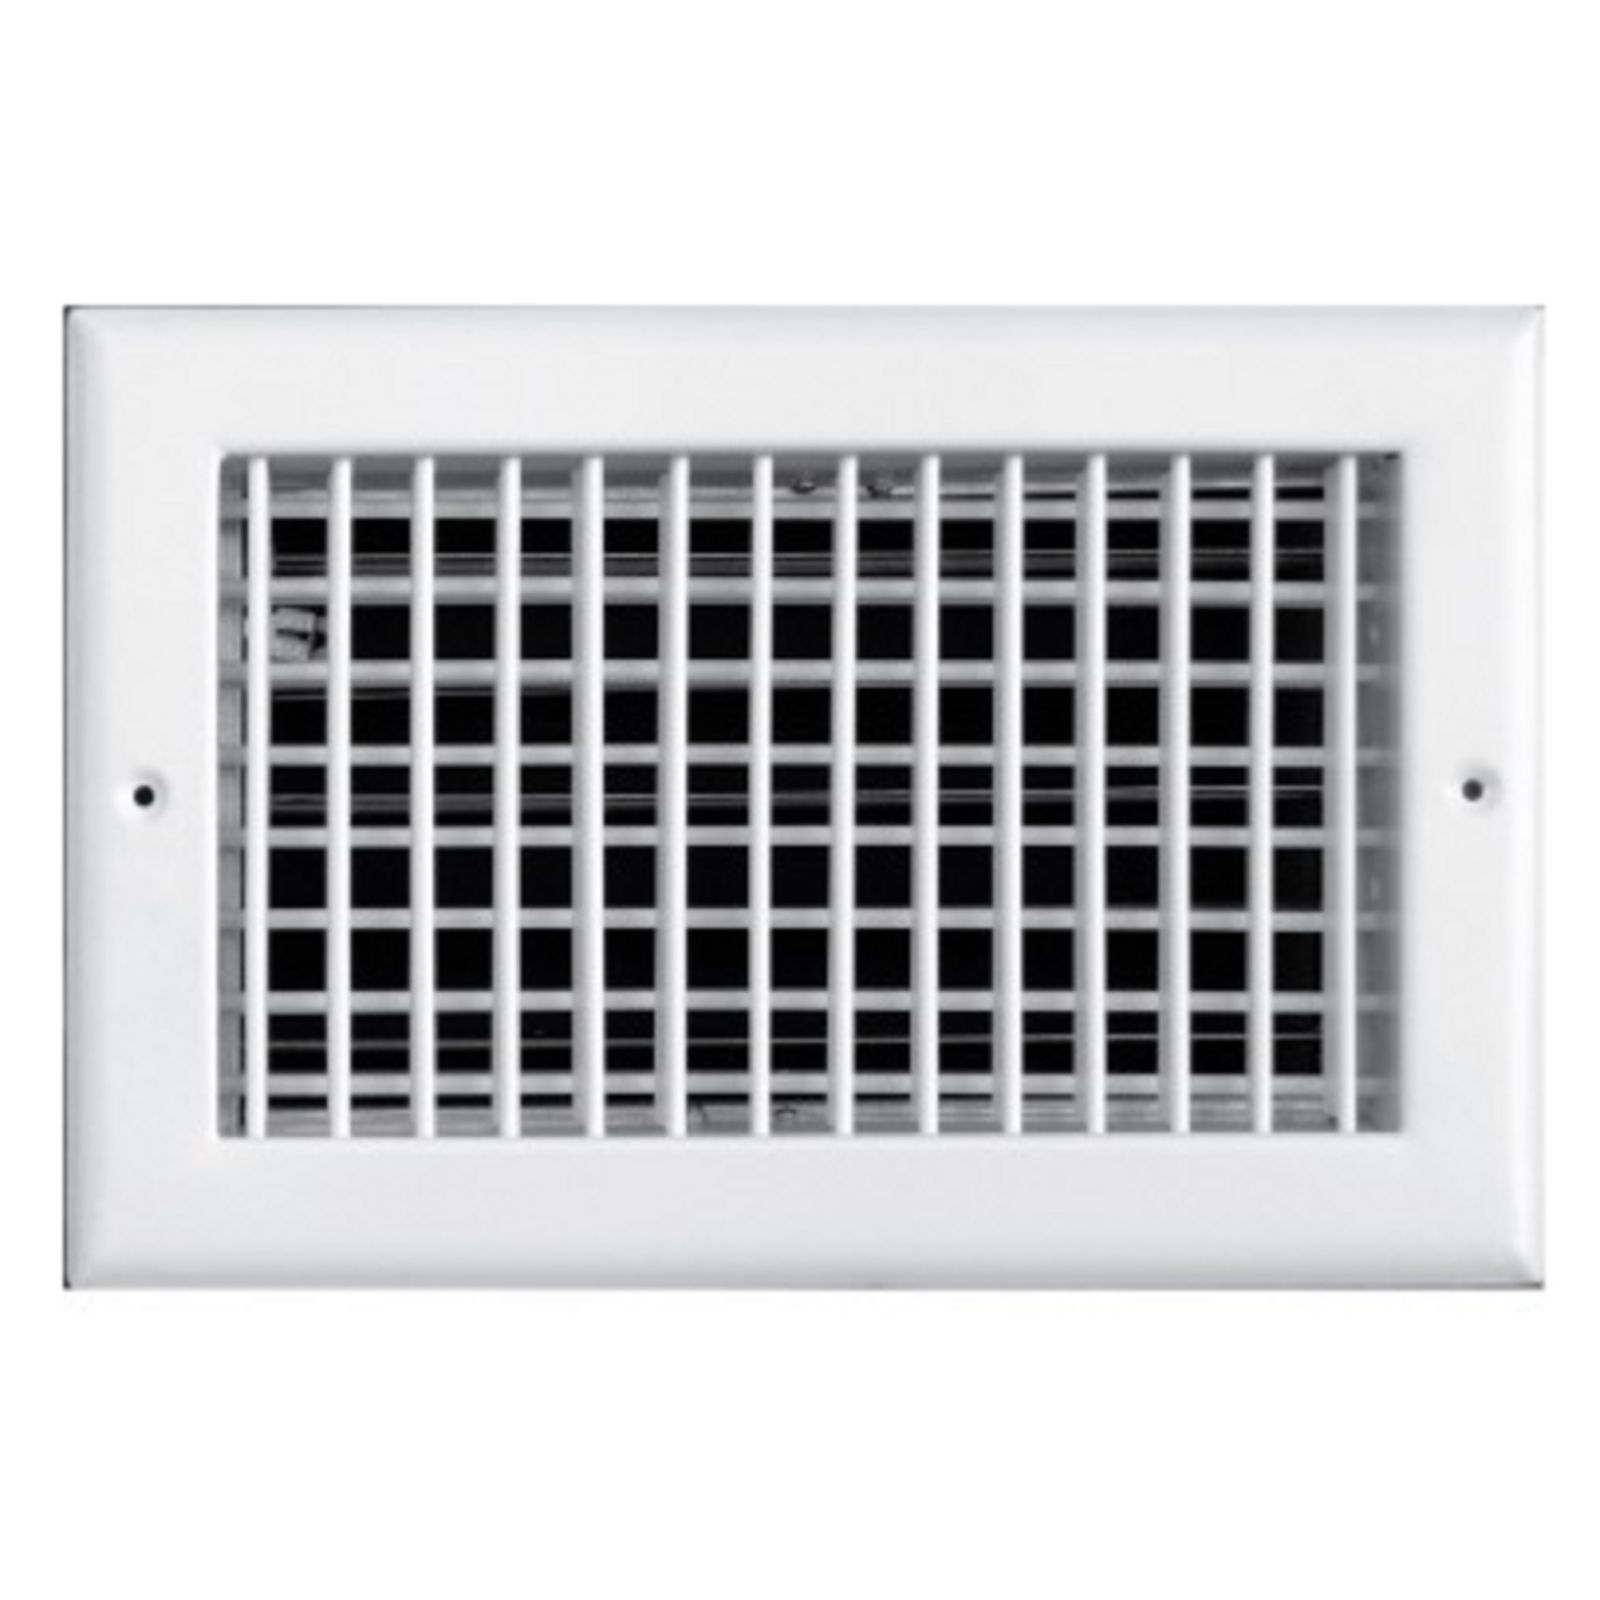 TRUaire 220VO 08X04 - Steel Adjustable Double Deflection Wall/Ceiling Register With Opposed Blade Damper, White, 08" X 04"